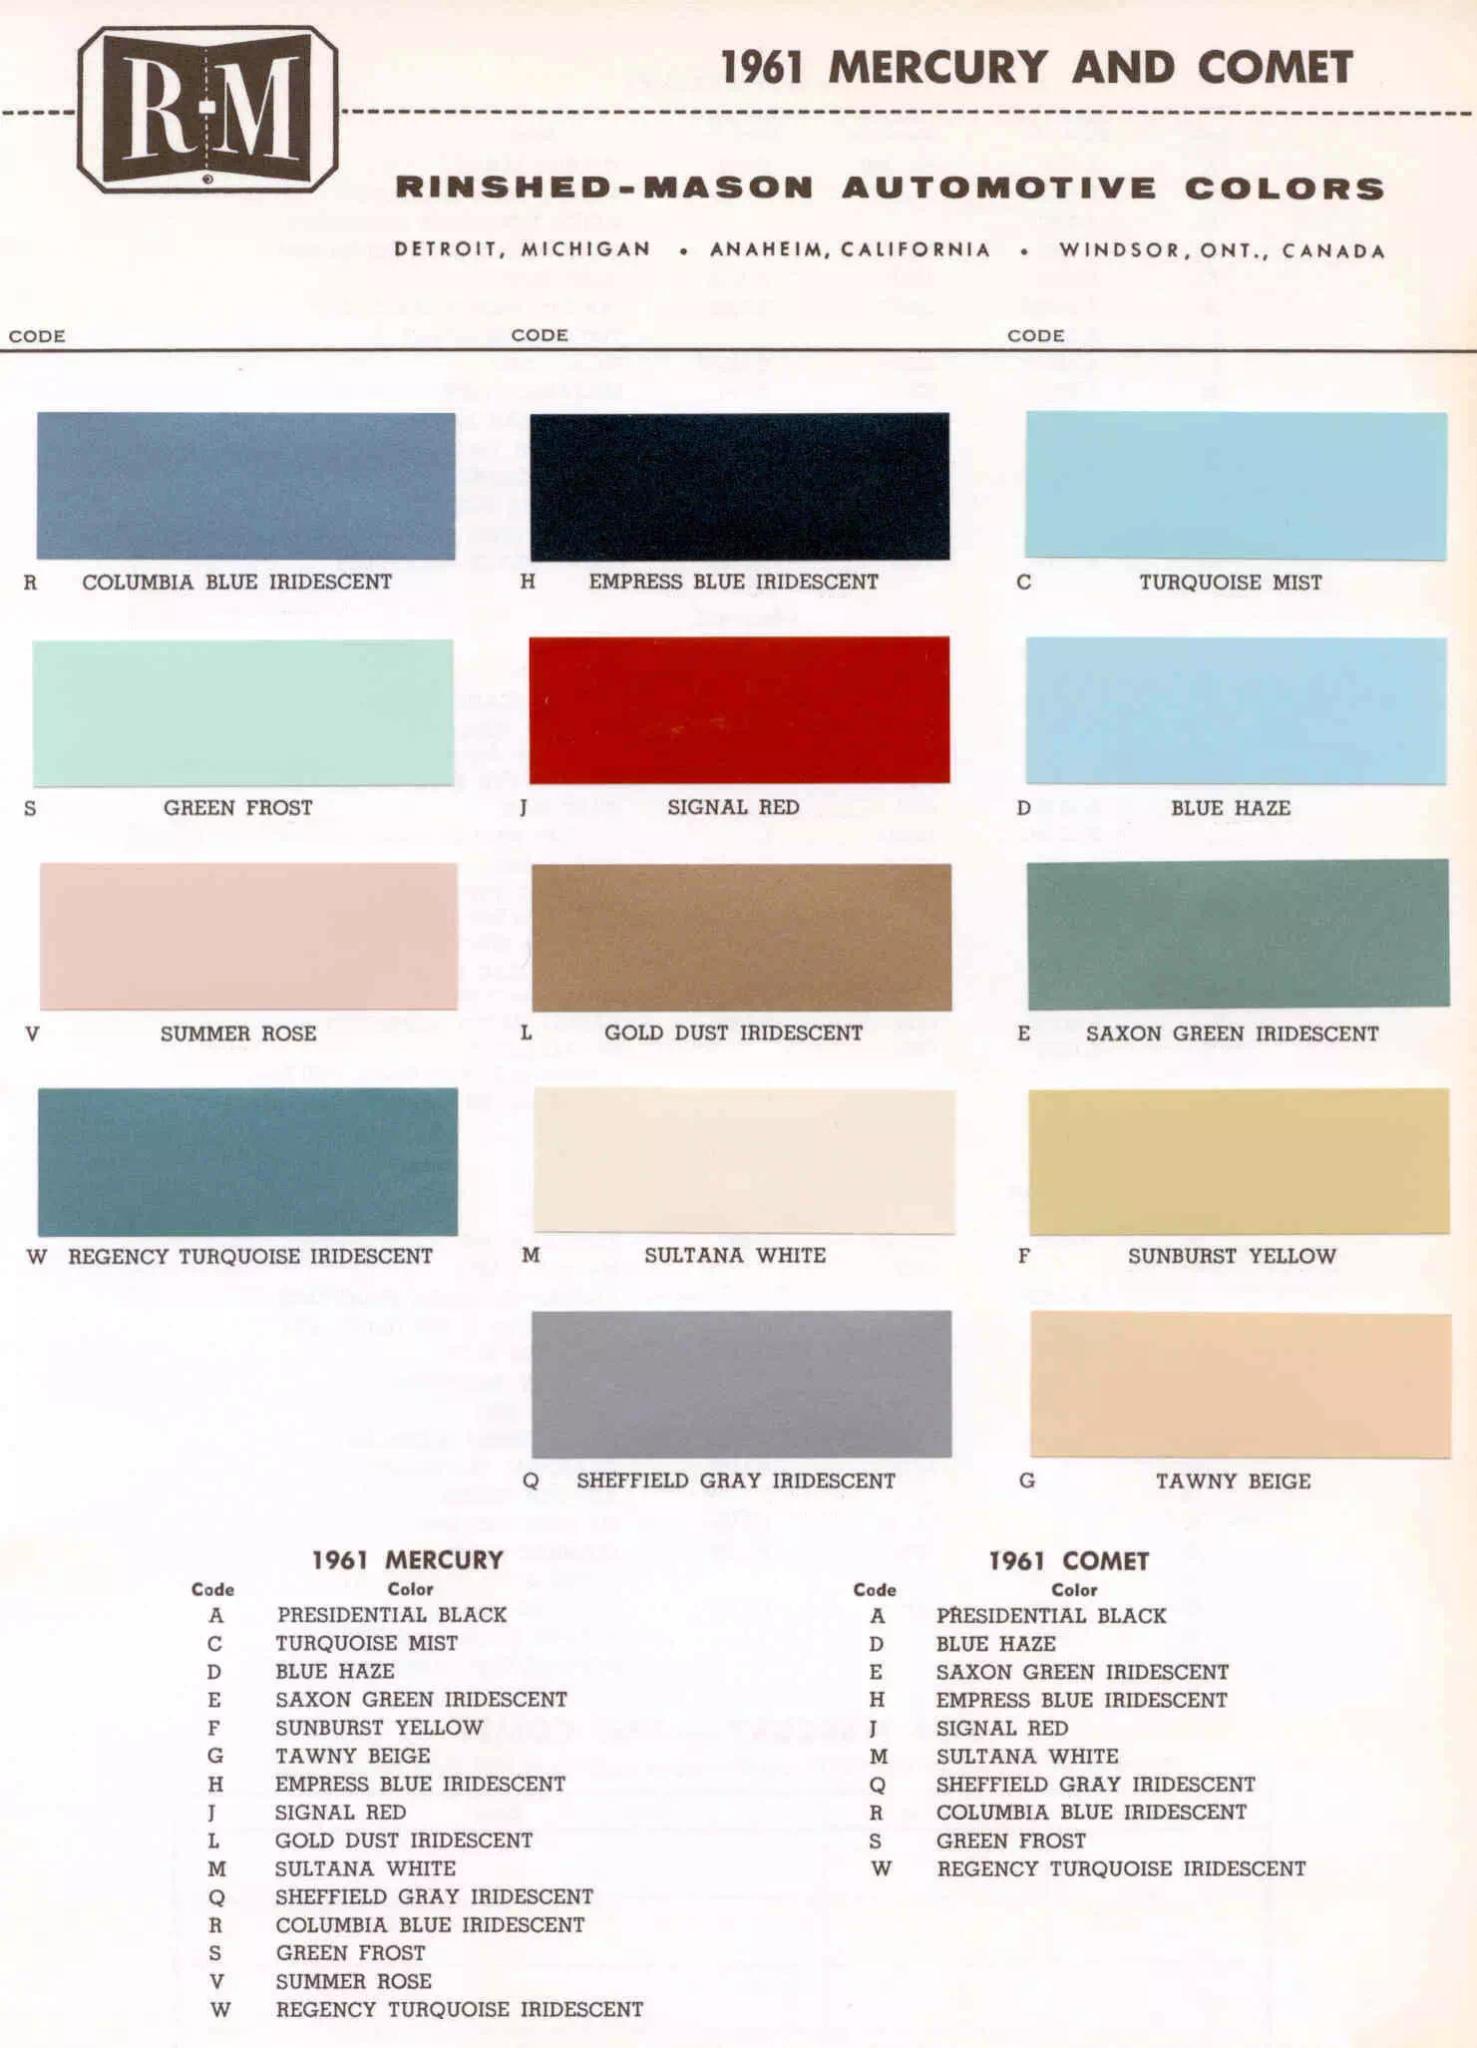 Color examples, Ordering Codes, OEM Paint Code, Color Swatches, and Color Names for the Ford Motor Company in 1961